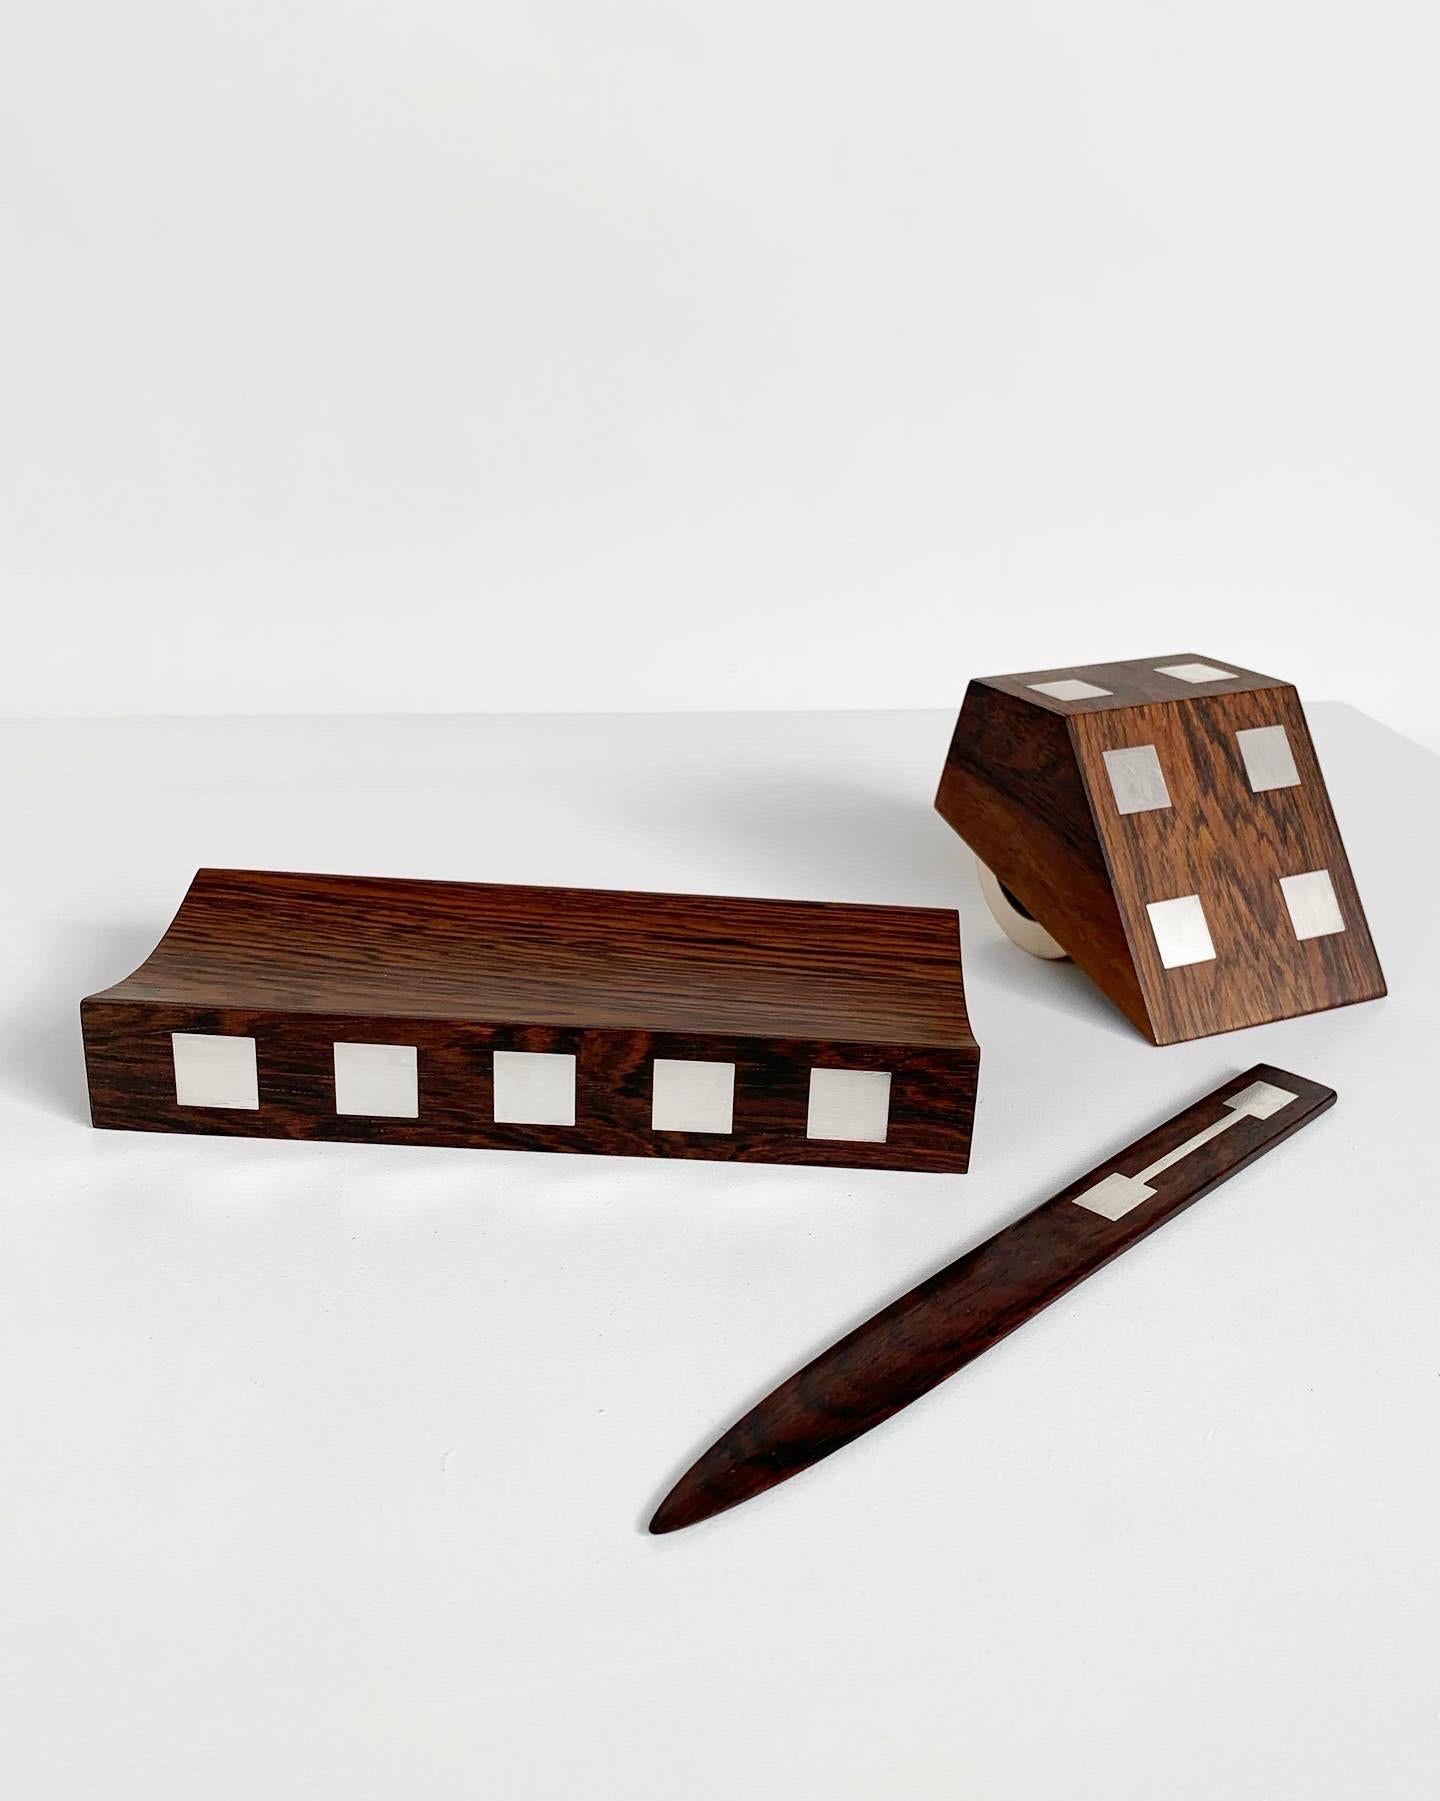 Rare desk set by Danish silversmith Hans Hansen, hand-crafted in Denmark in the 1960s.

Letter opener, pen tray & ink roller made of rosewood & solid Sterling Silver inlays. The ink roller comes with the original blotting paper.

Pen tray W: 20